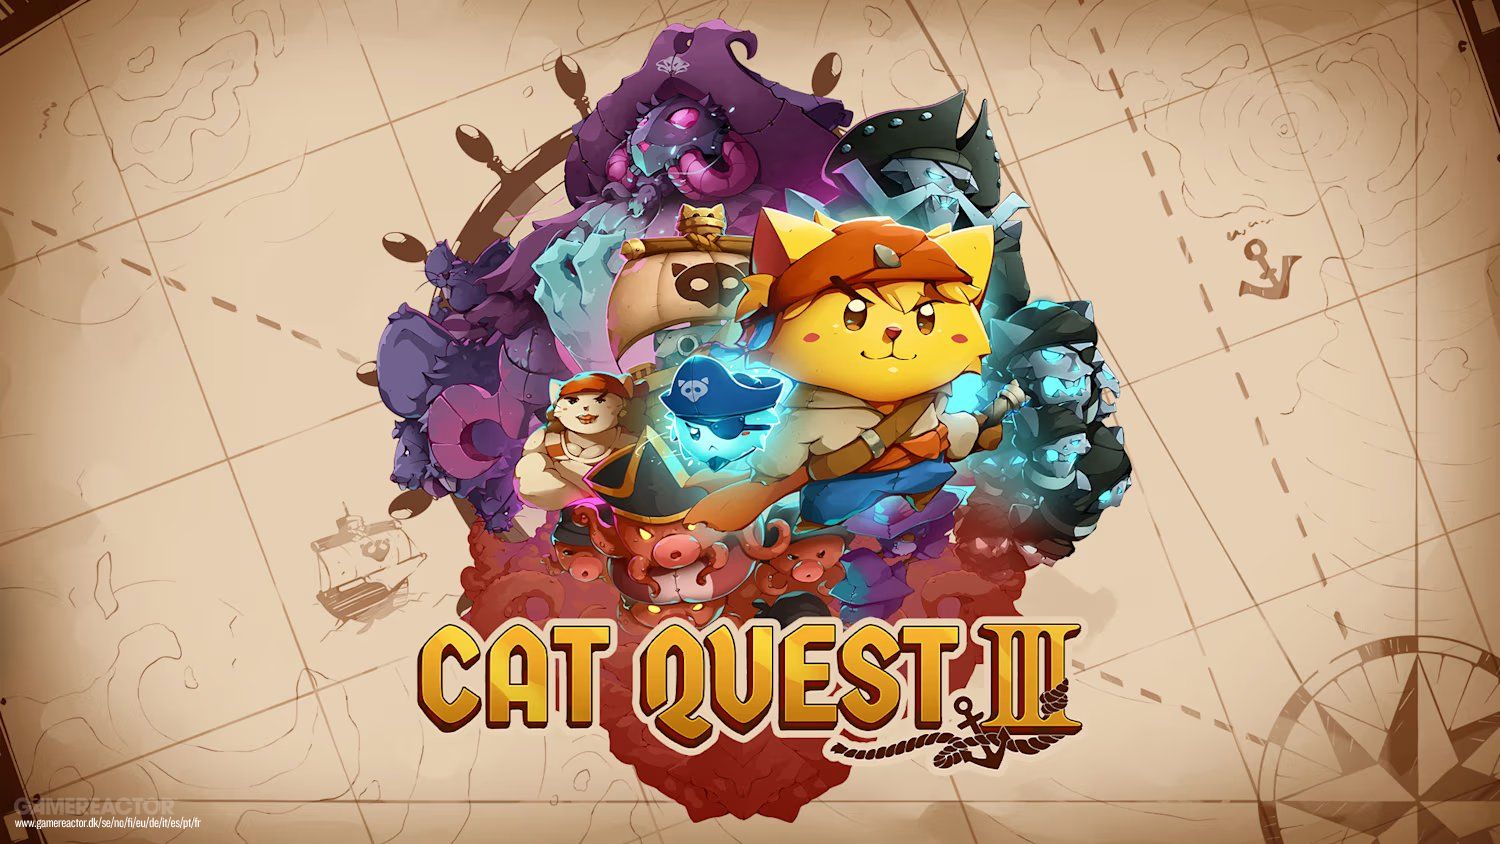 Cat Quest III Live the Pirate Life August 8 – Cat Quest III: Pirates of the Purribean